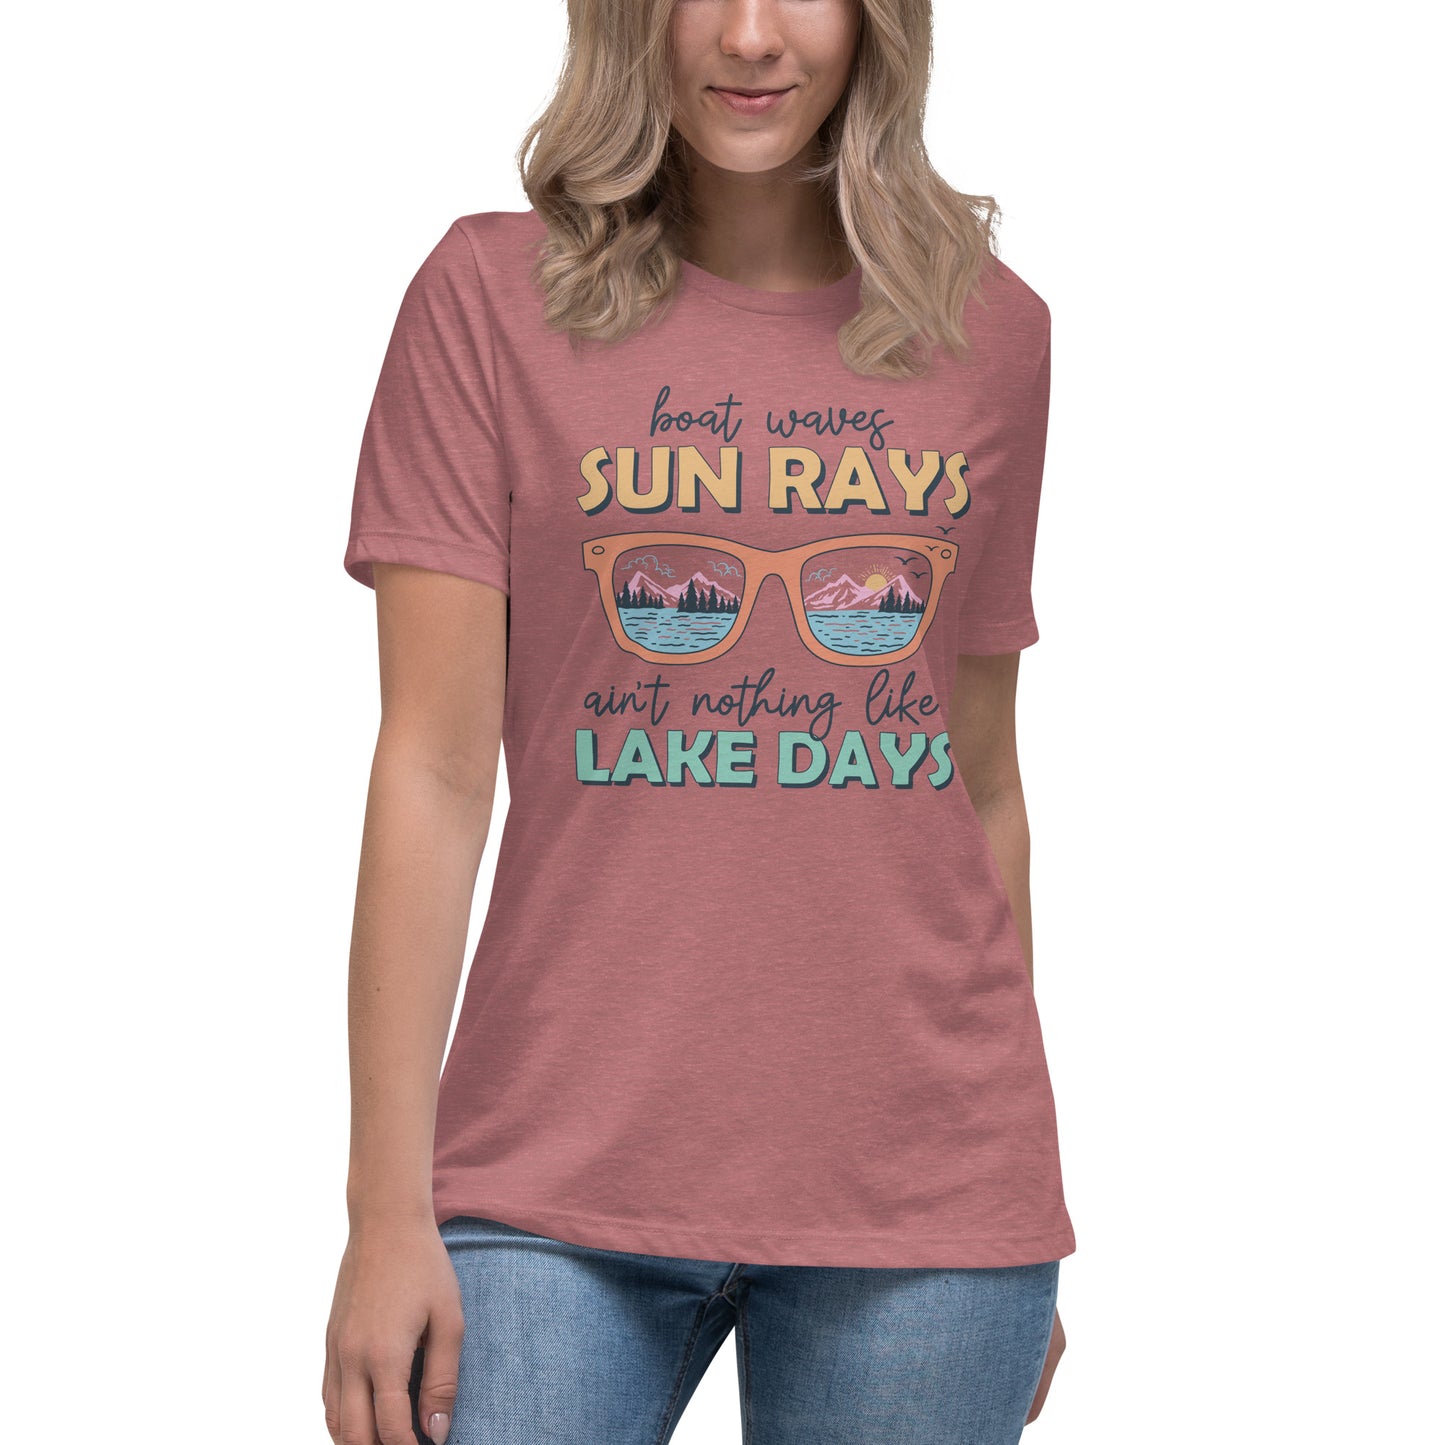 Sunny Days at the Lake Women's